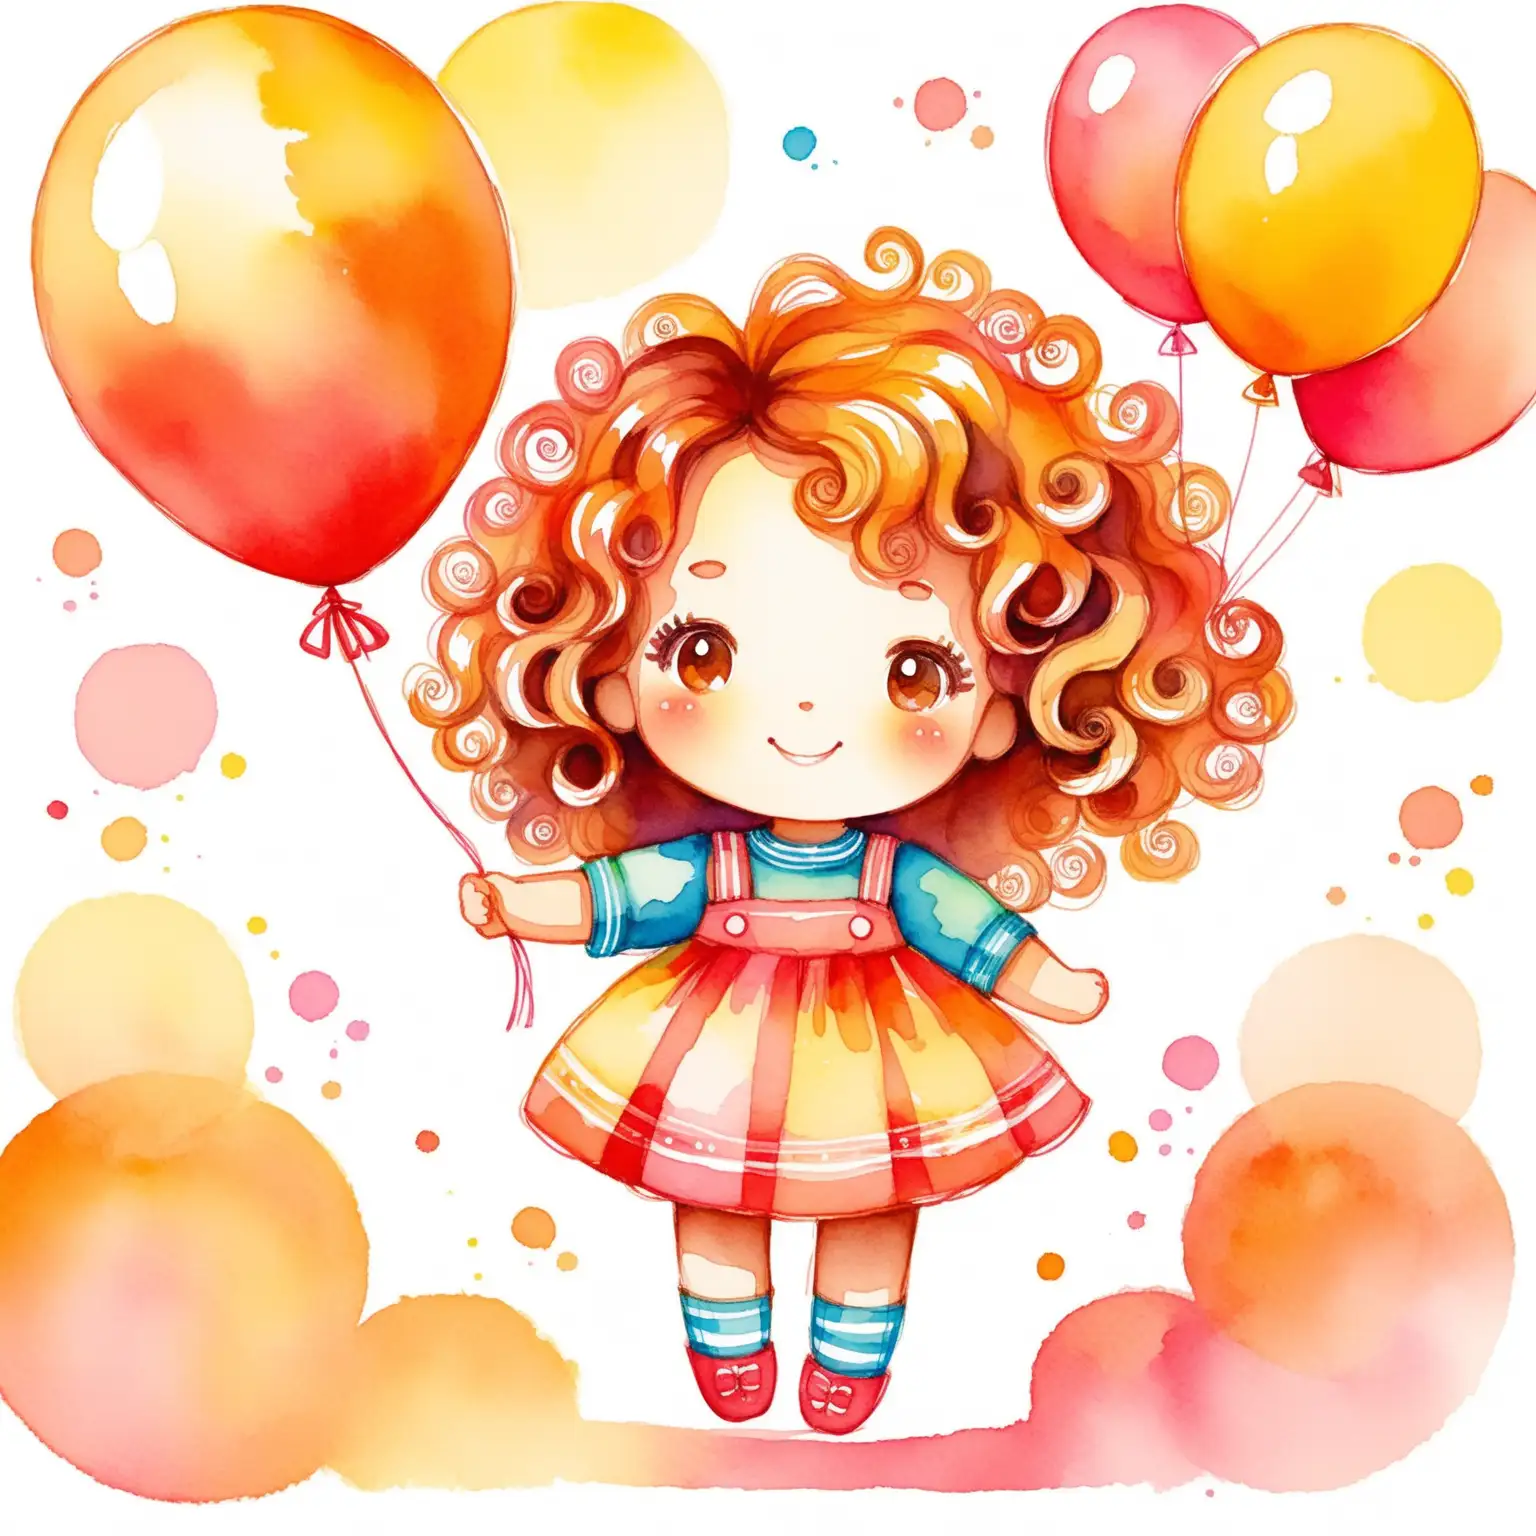 Cute smiling girl doll with curly hair, holding a balloon , sketchy expressionist style, fine strokes, vivid colors, hand-drawn illustration for kids, watercolor 